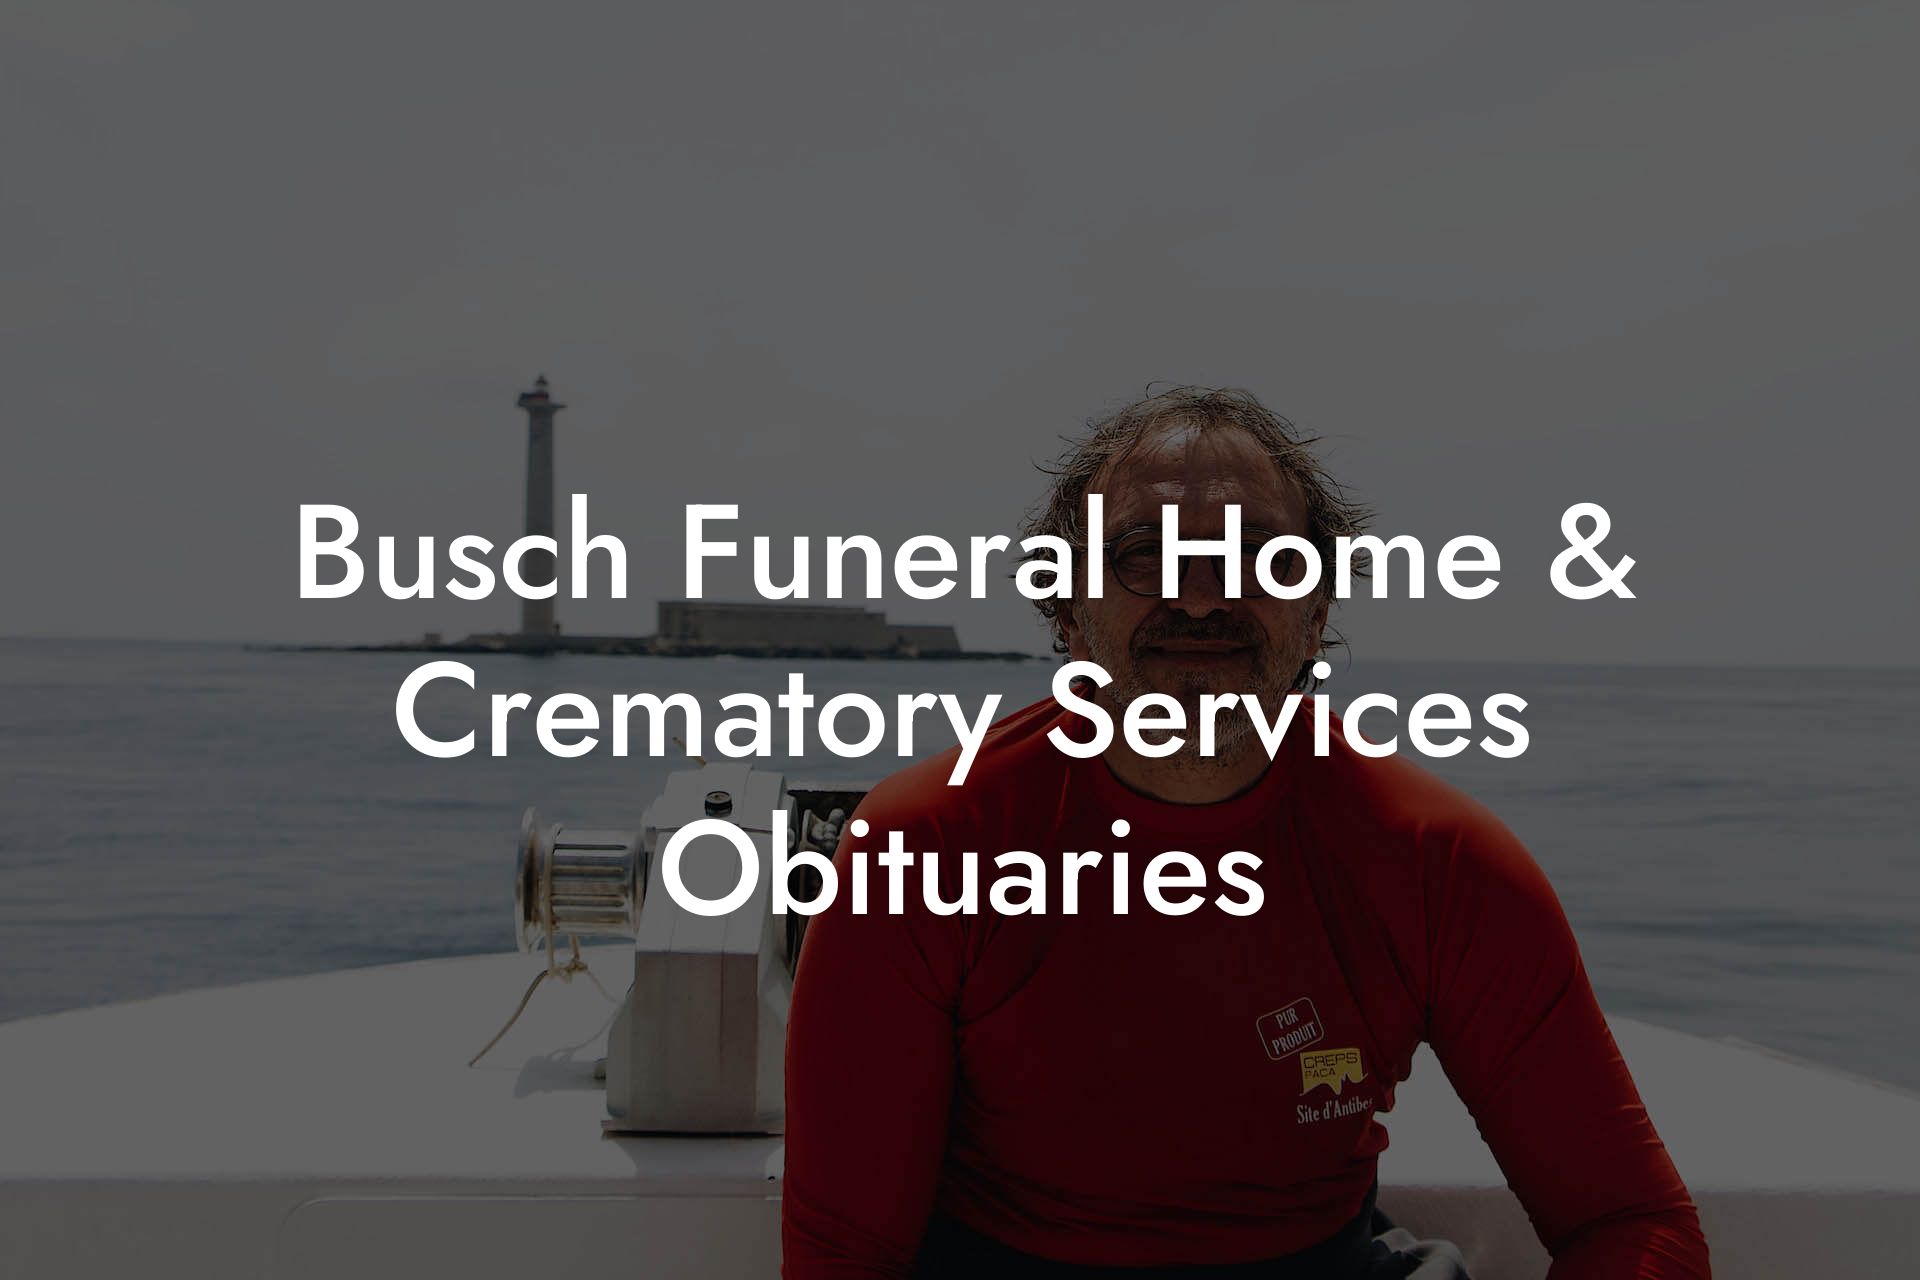 Busch Funeral Home & Crematory Services Obituaries